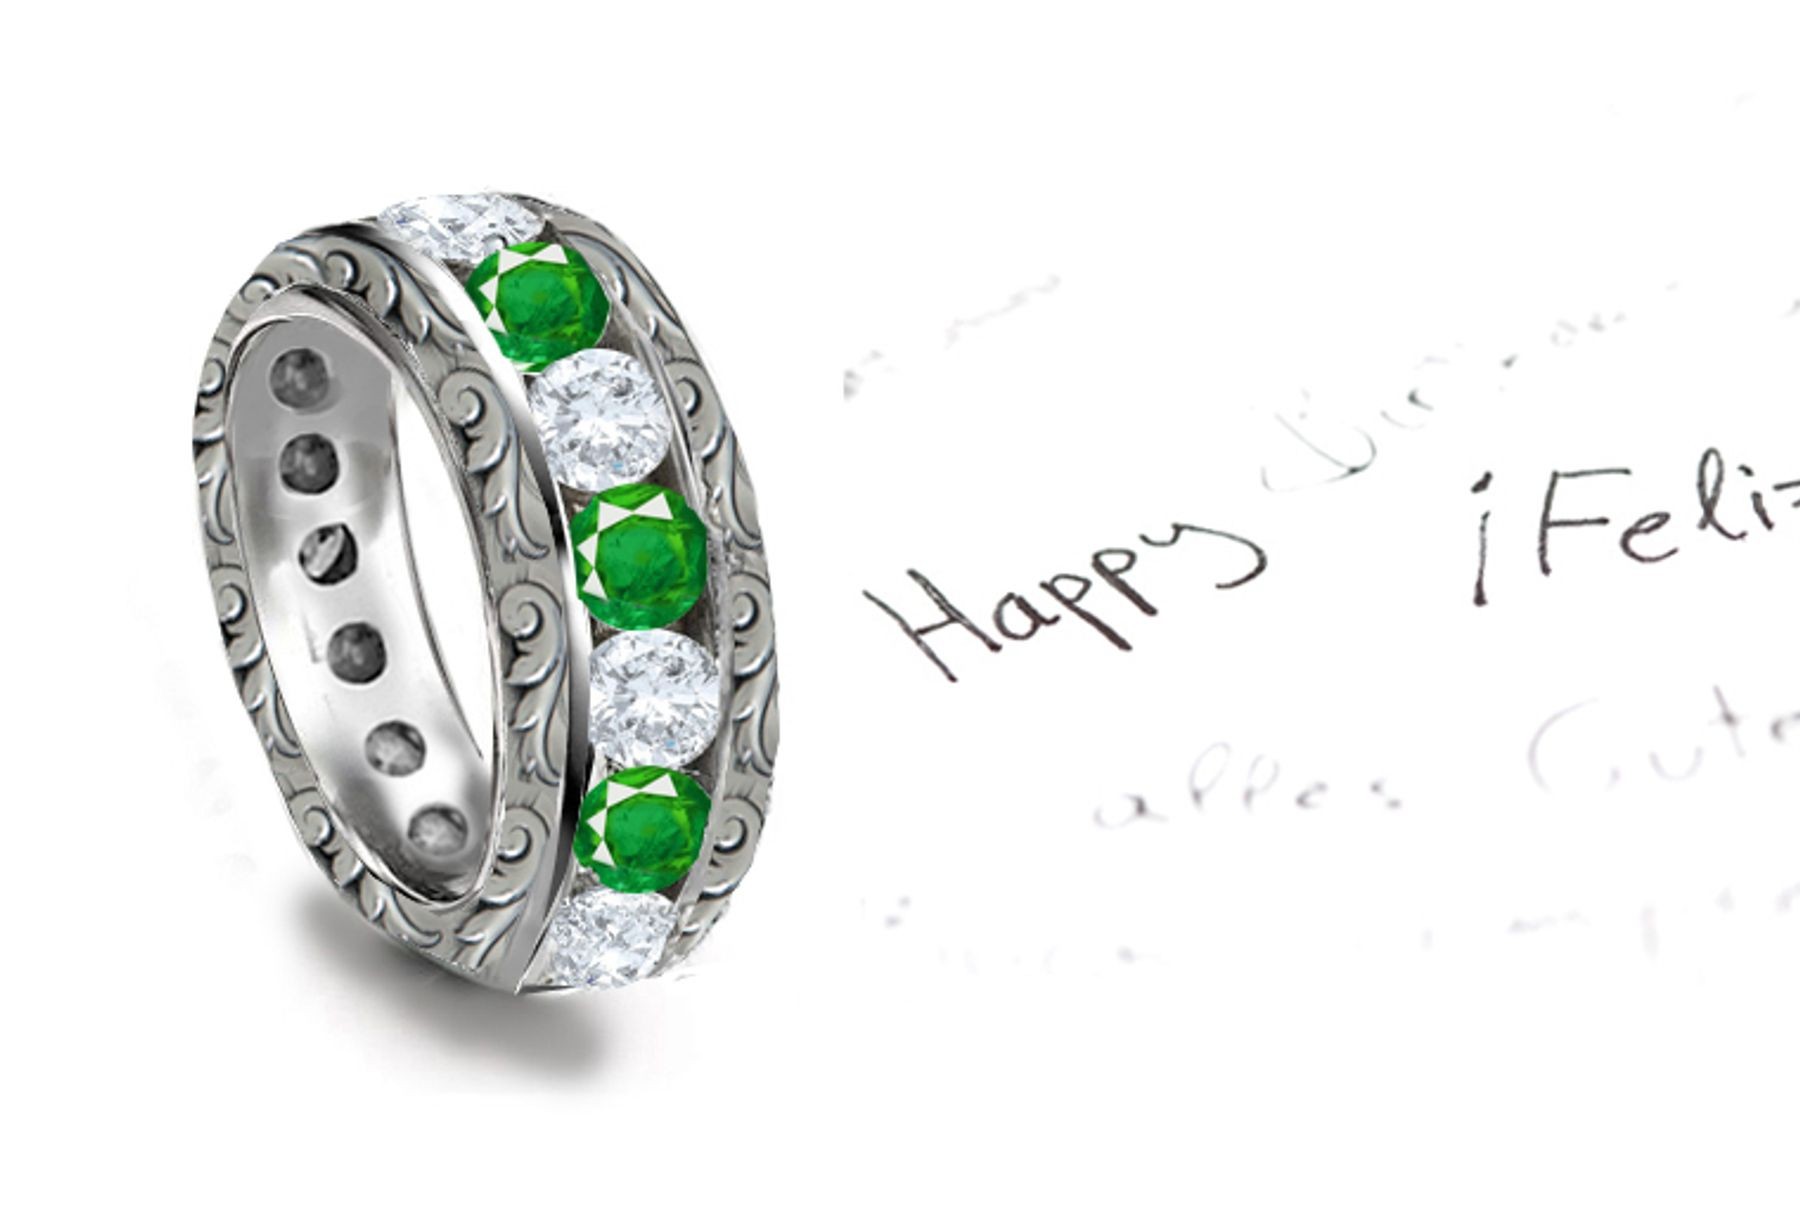 NEWEST DESIGN: Etched Leaf Scrolls & Motifs Diamond & Emerald Platinum Scroll Ring Voicing Love and Touch